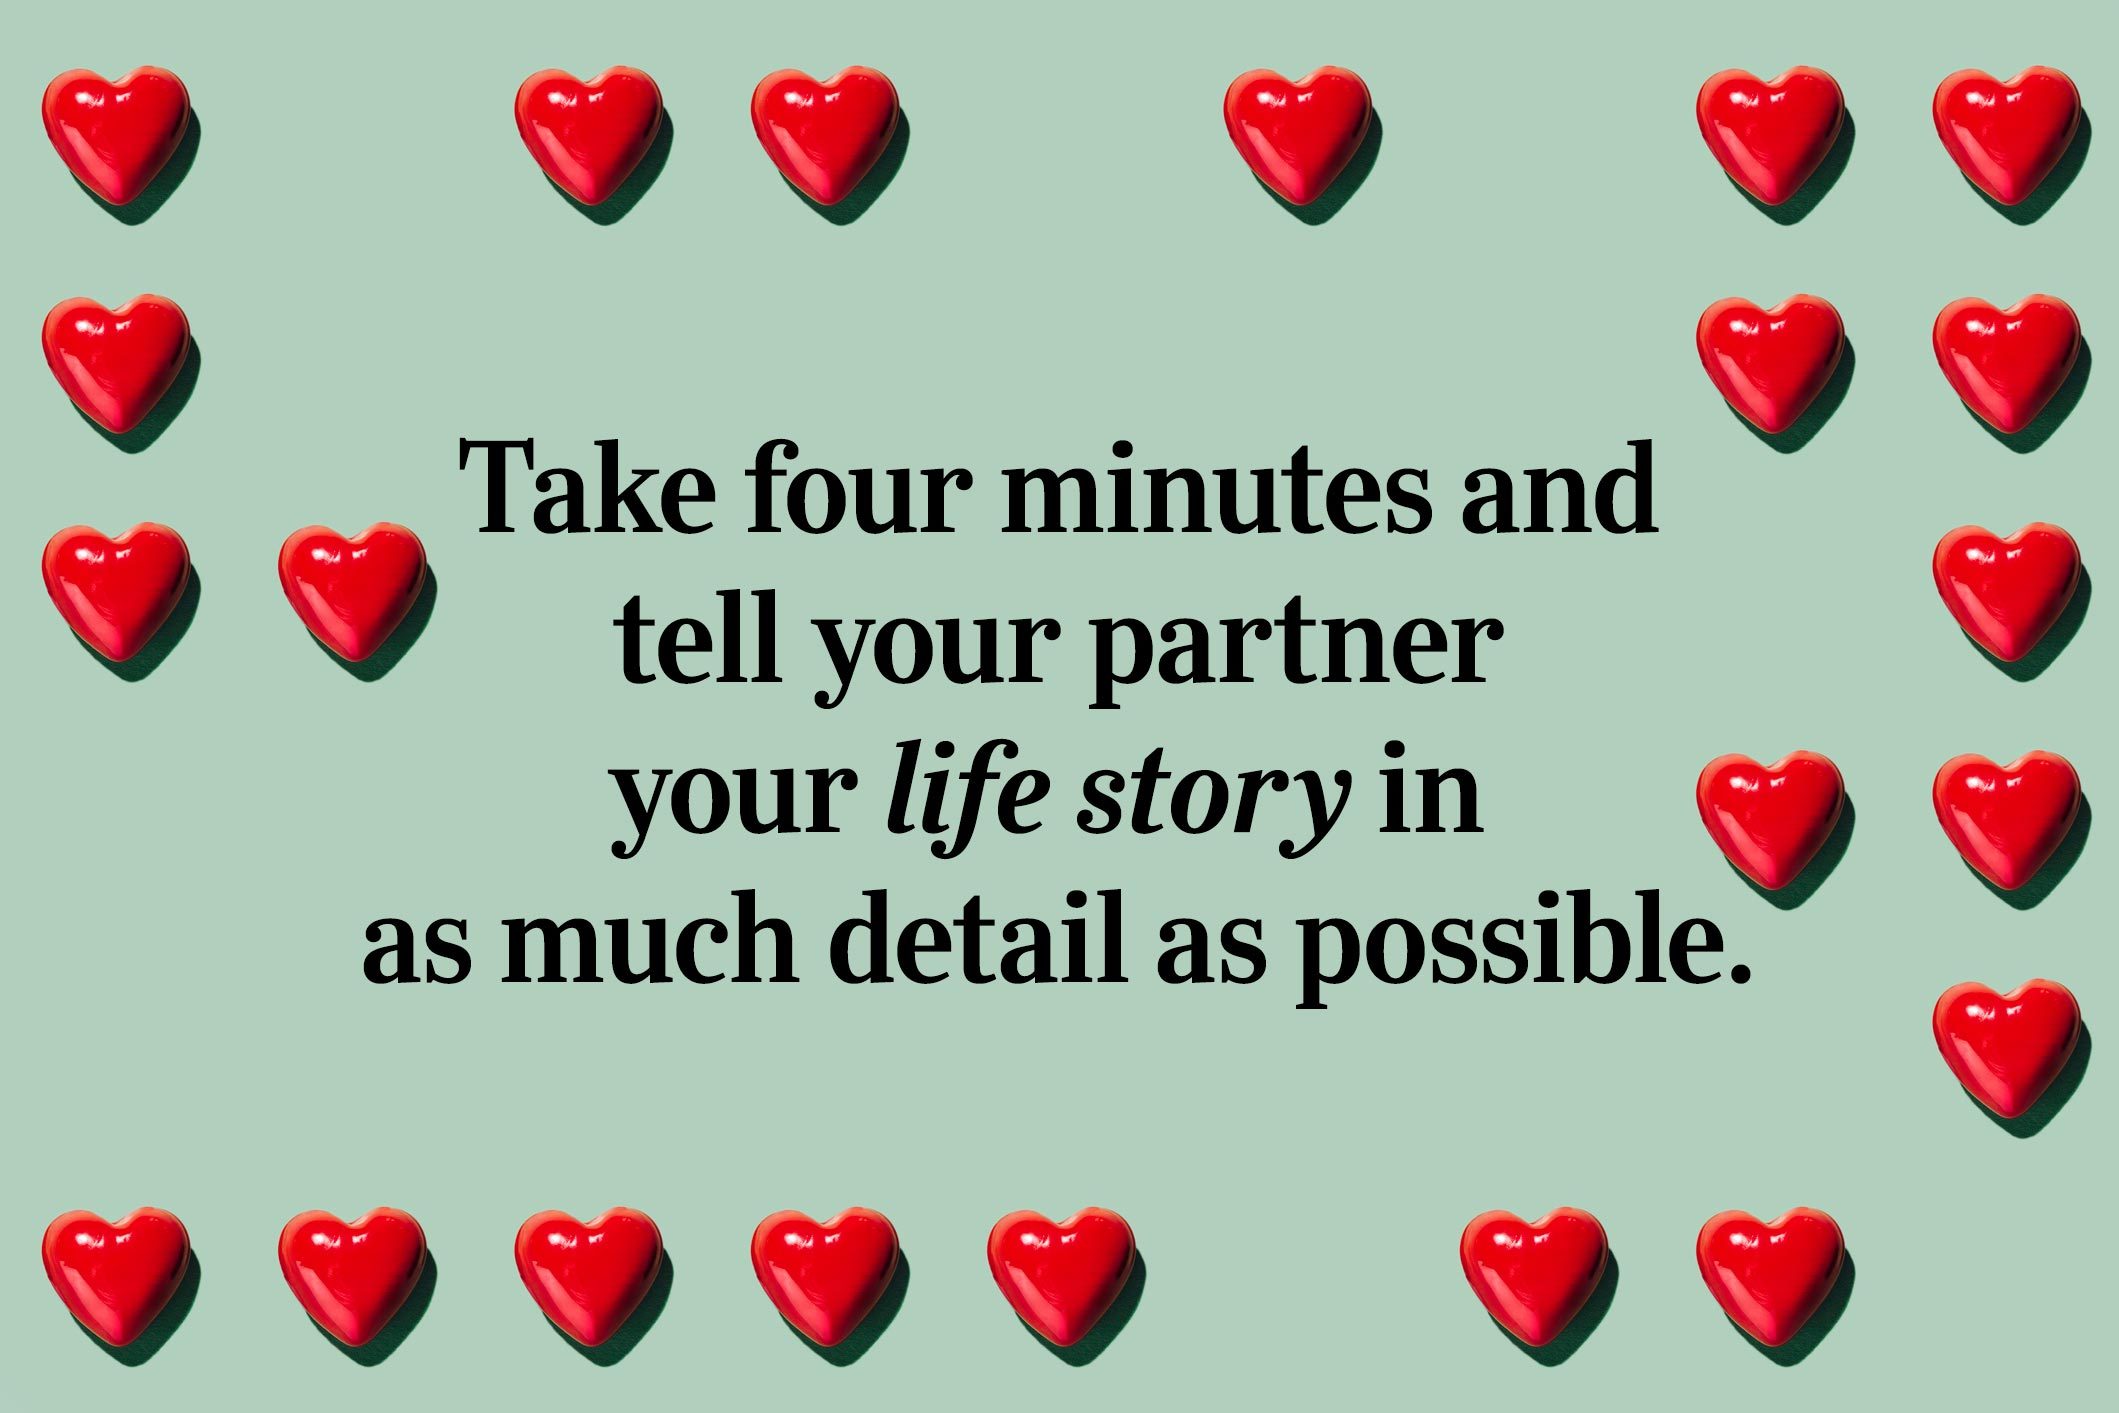 <p>Take four minutes and tell your partner your <a href="https://www.rd.com/real-life-stories/">life story</a> in as much detail as possible.</p>